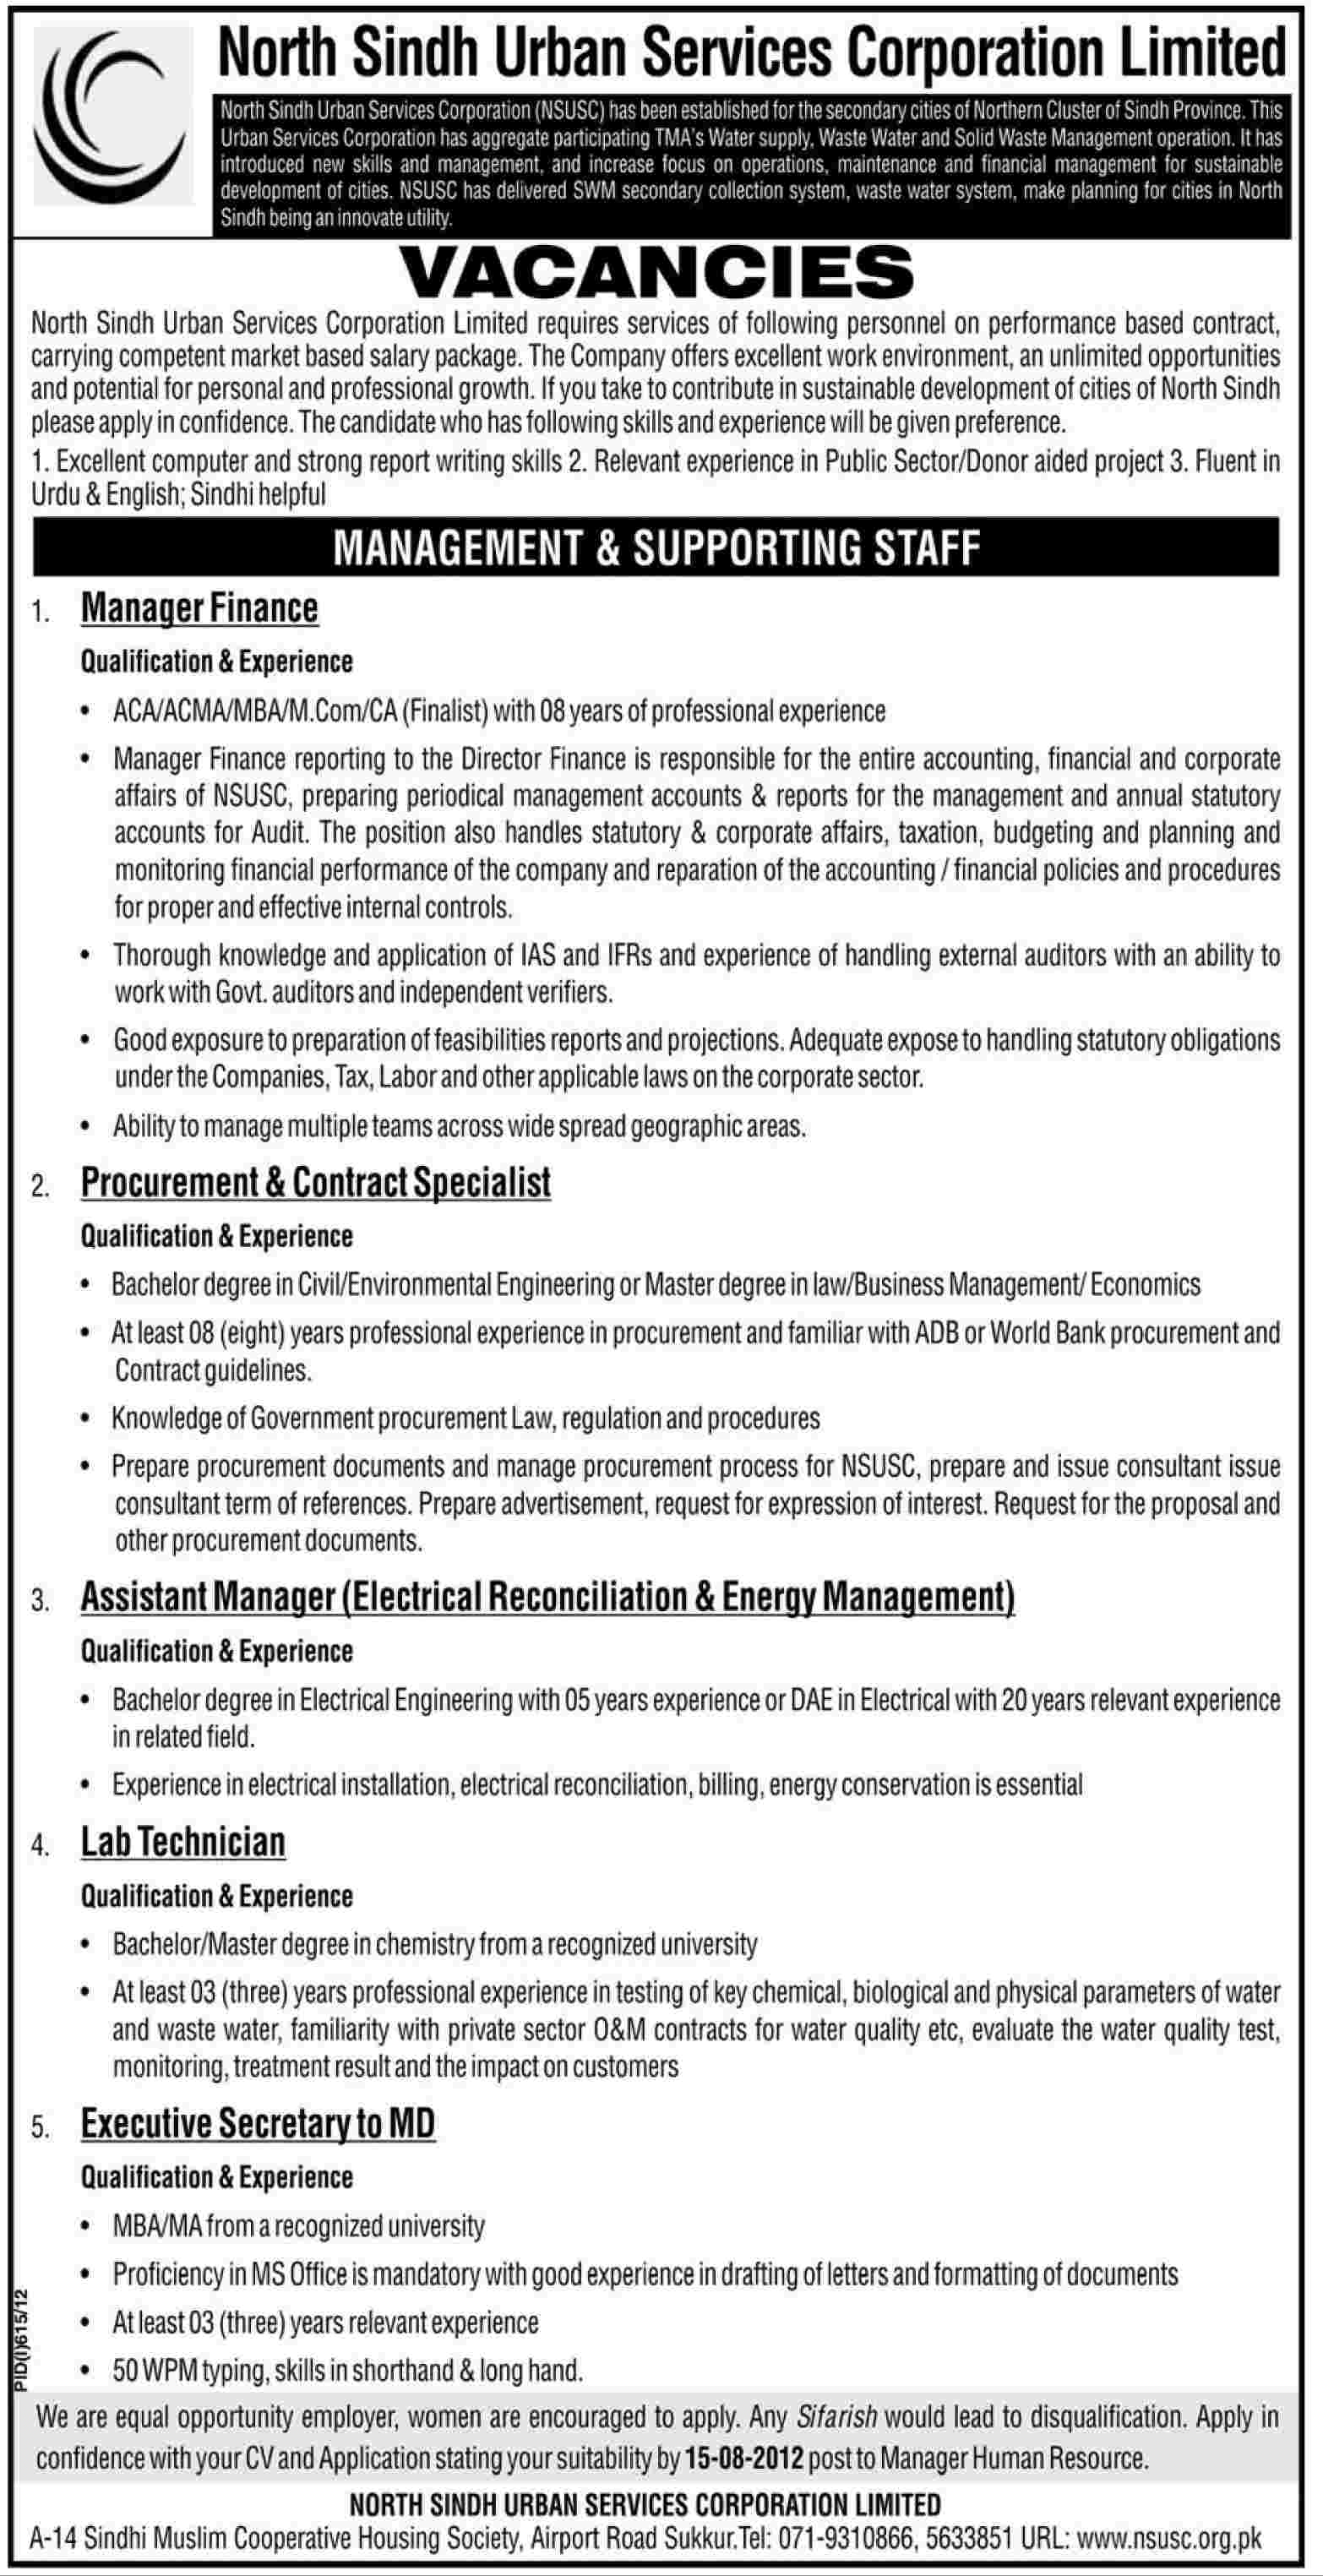 North Sindh Urban Services Corporation Limited Requires Management & Supporting Staff